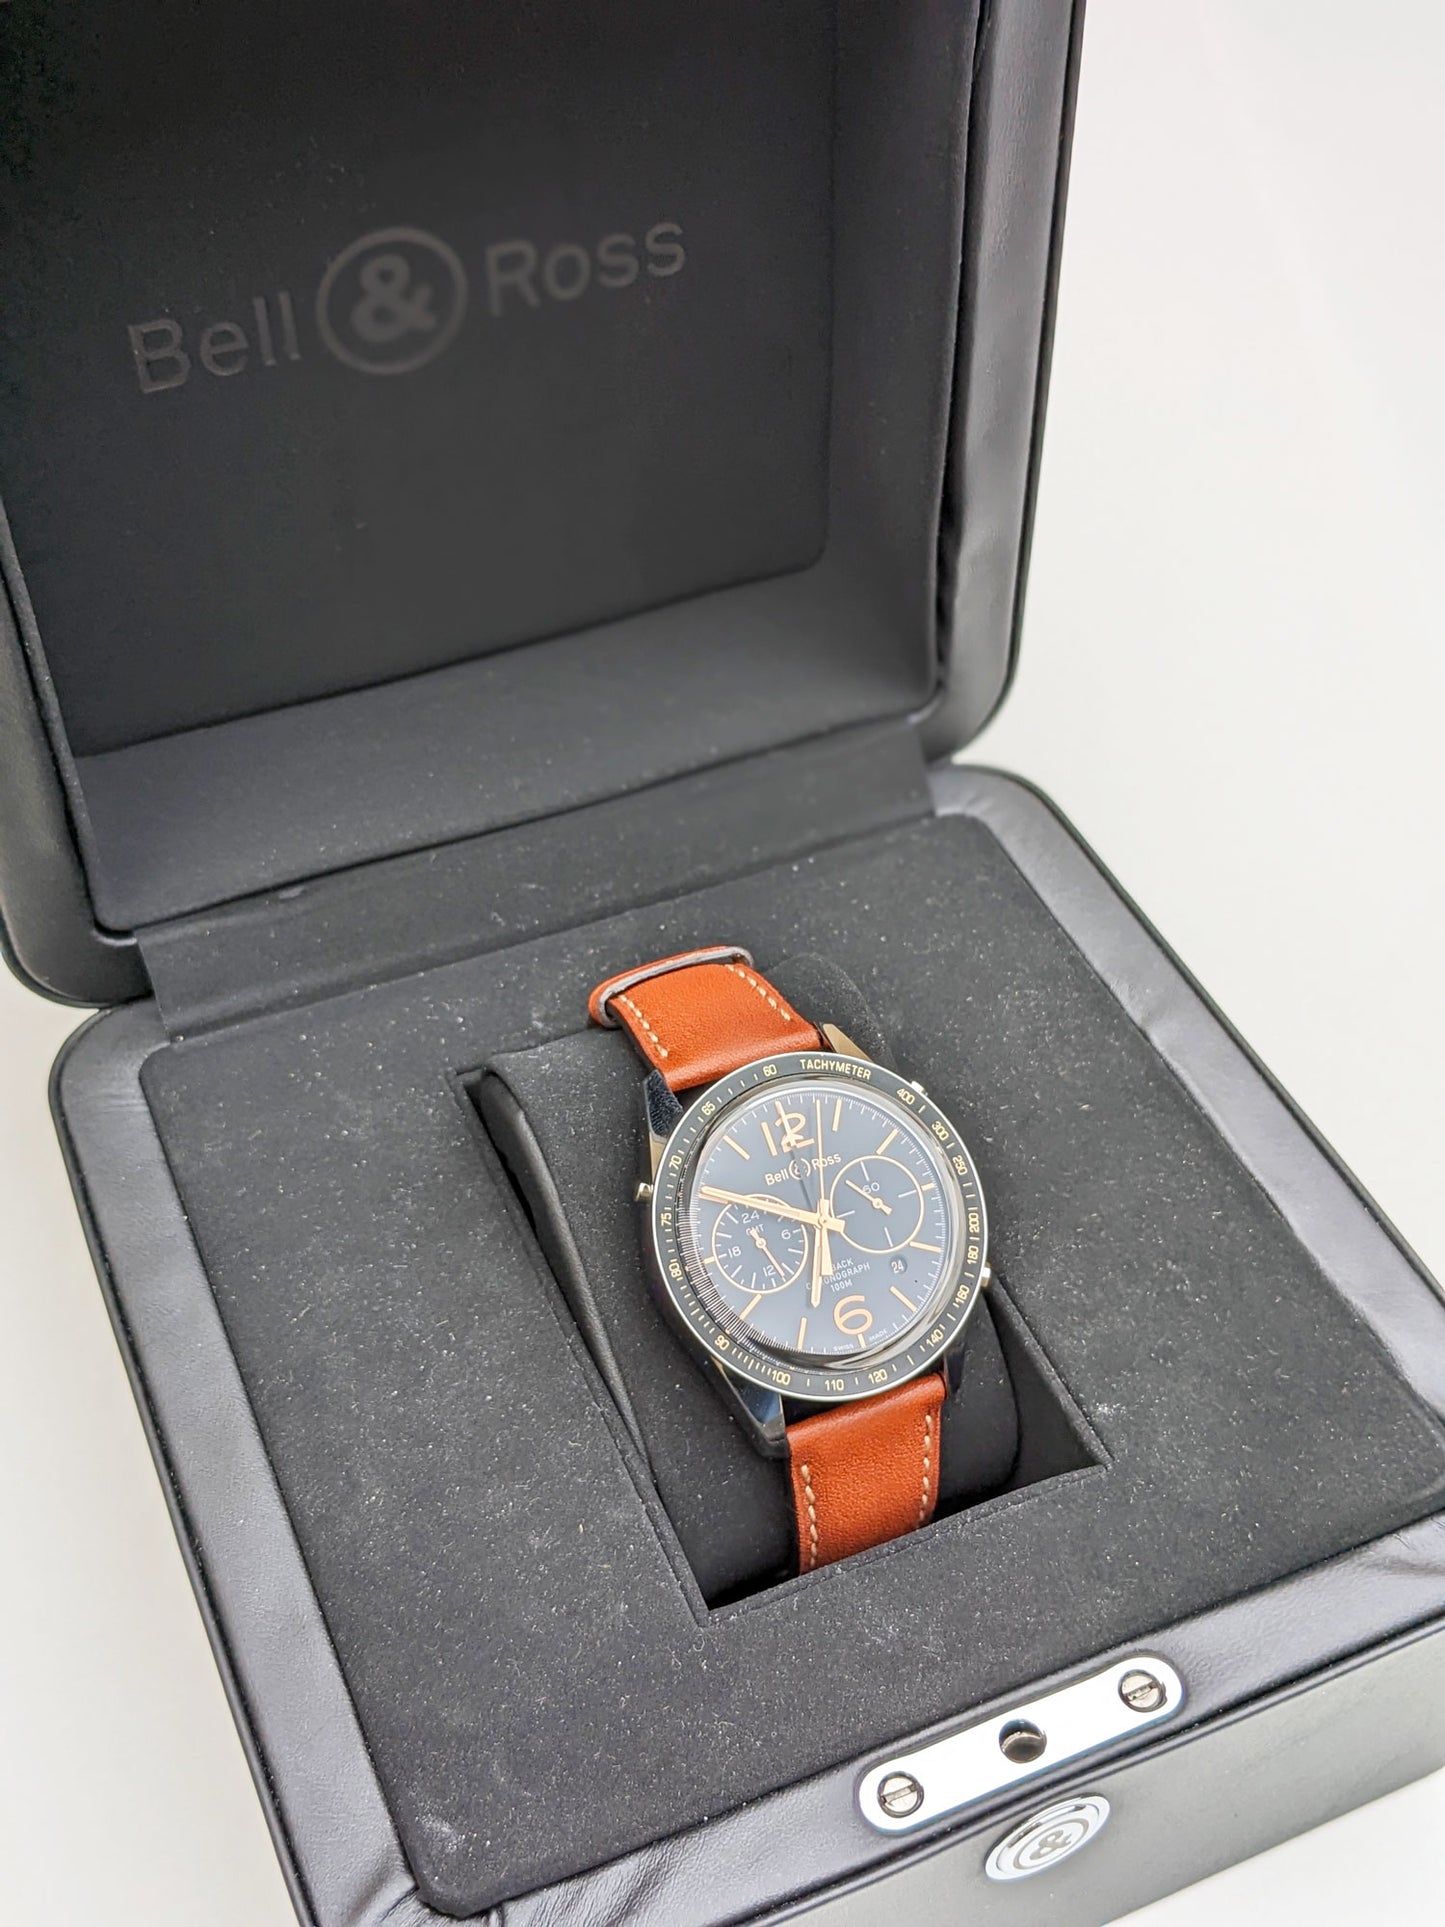 Bell & Ross 126 Flyback GMT (réf. BR-126-55 - circa 2010)